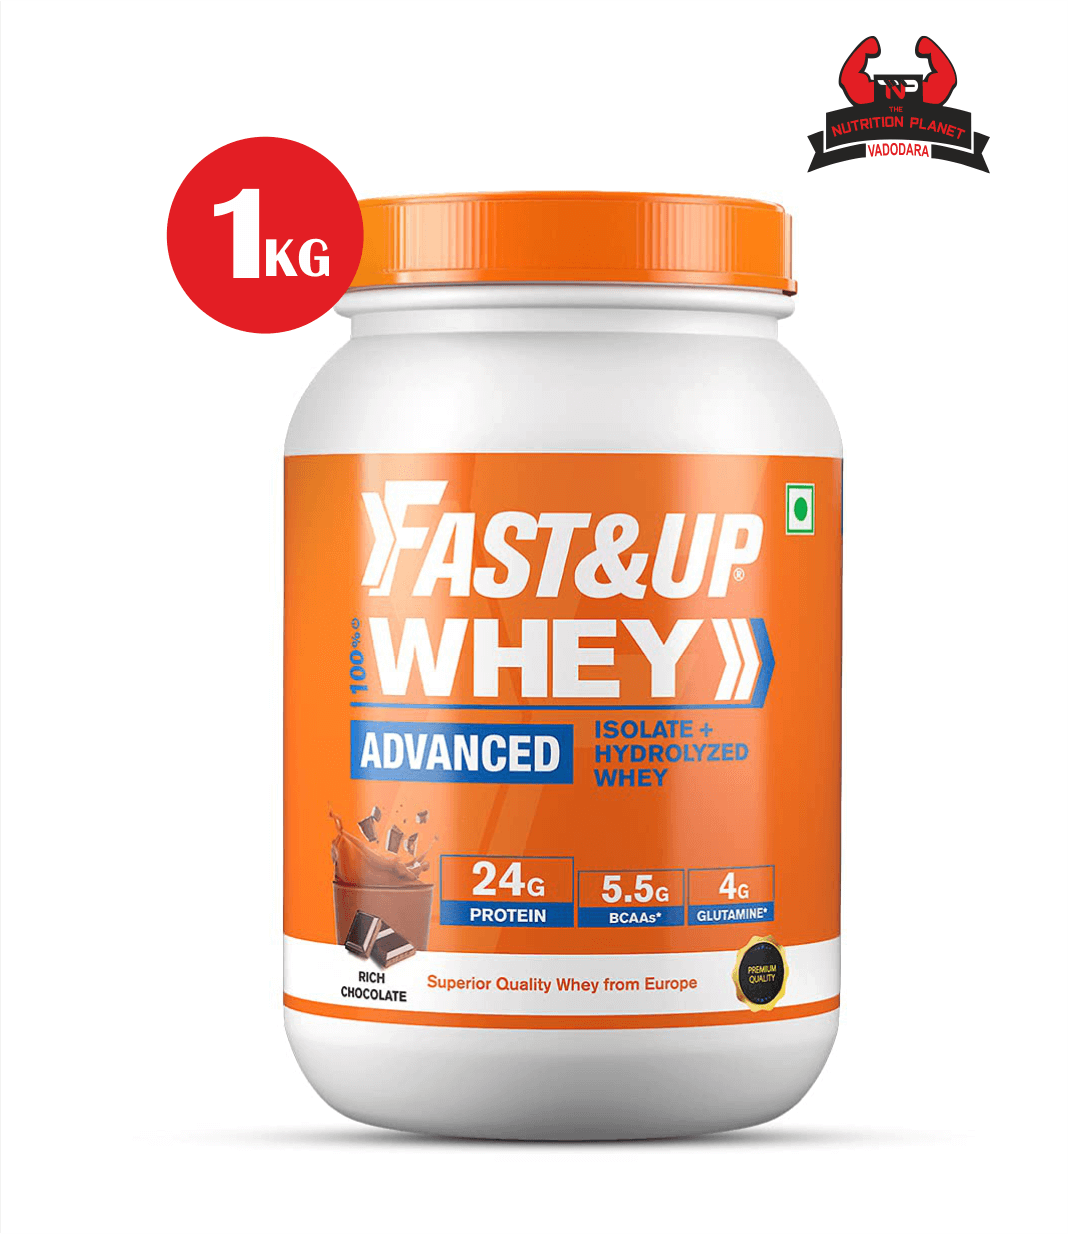 Fast&Up 100% Whey Isolate & Hydrolysate Whey Protein (Rich Chocolate, 30 Servings) - 24g Protein, 5.5g BCAA, 4g Glutamine (2.01Lbs, 912gm) - 1 KG